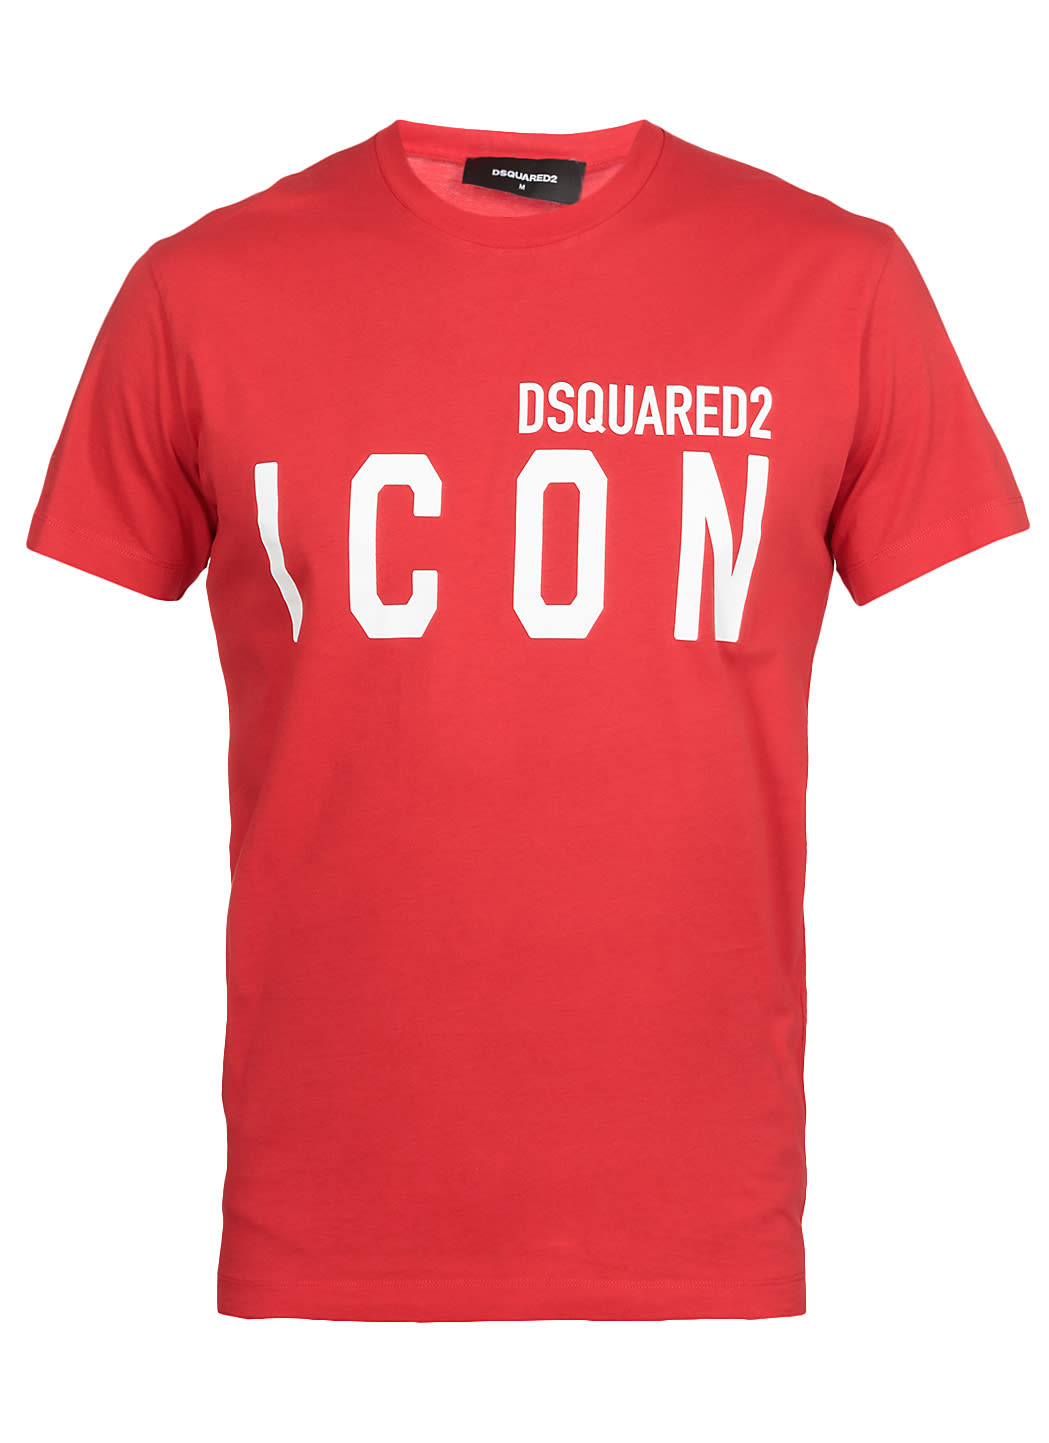 DSQUARED2 ICON T-SHIRT,S79GC0003 S23009312